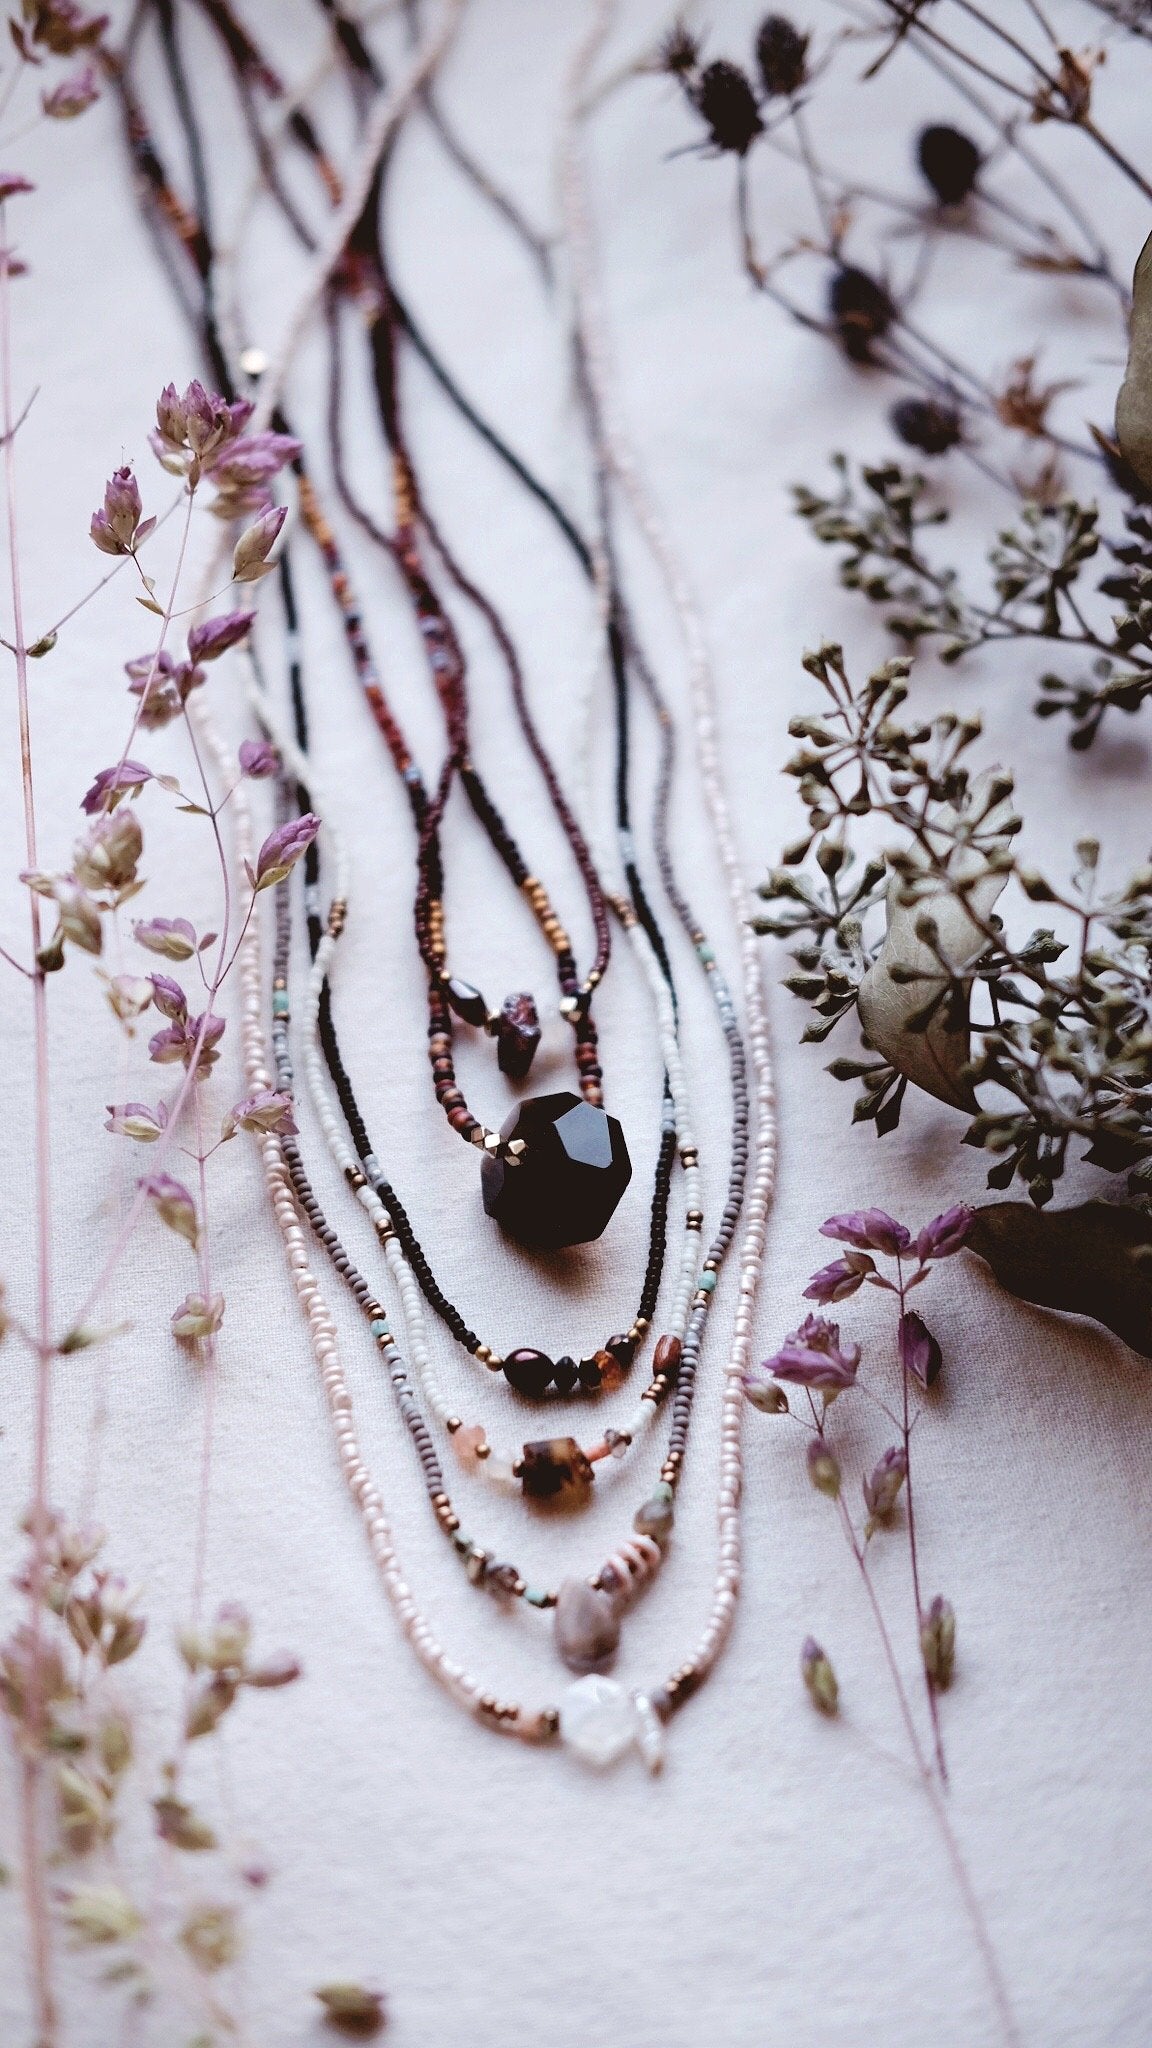 The Numinous + Baltic Amber + Moonstone + Fossilized Coral + Wood + Labradorite necklace